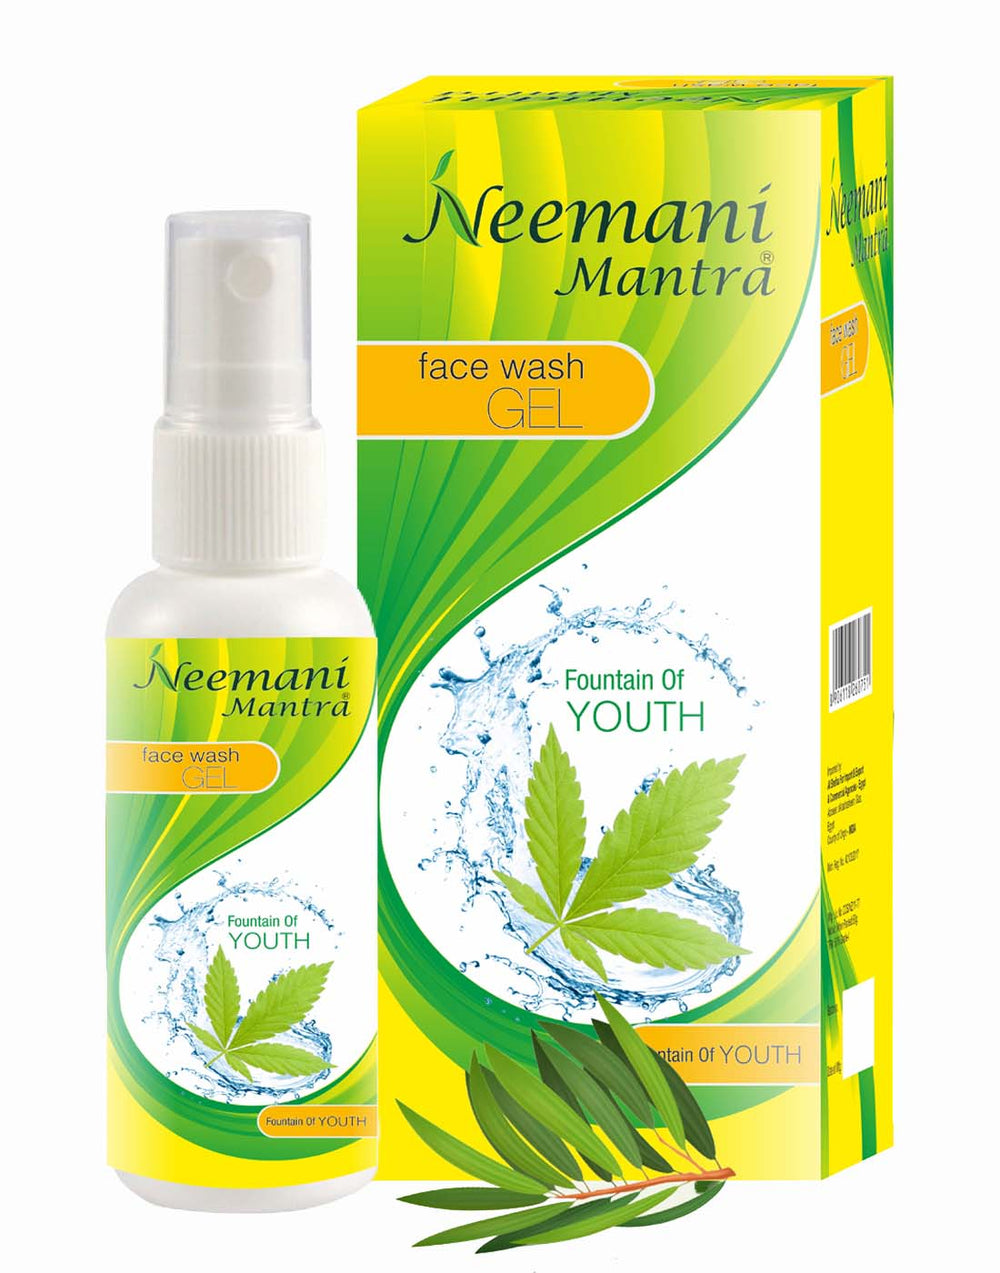 Tantraxx Neemani Mantra Organic & Purifying Neem Foaming Face Wash For All Skin Type and For Men & Women (60g)